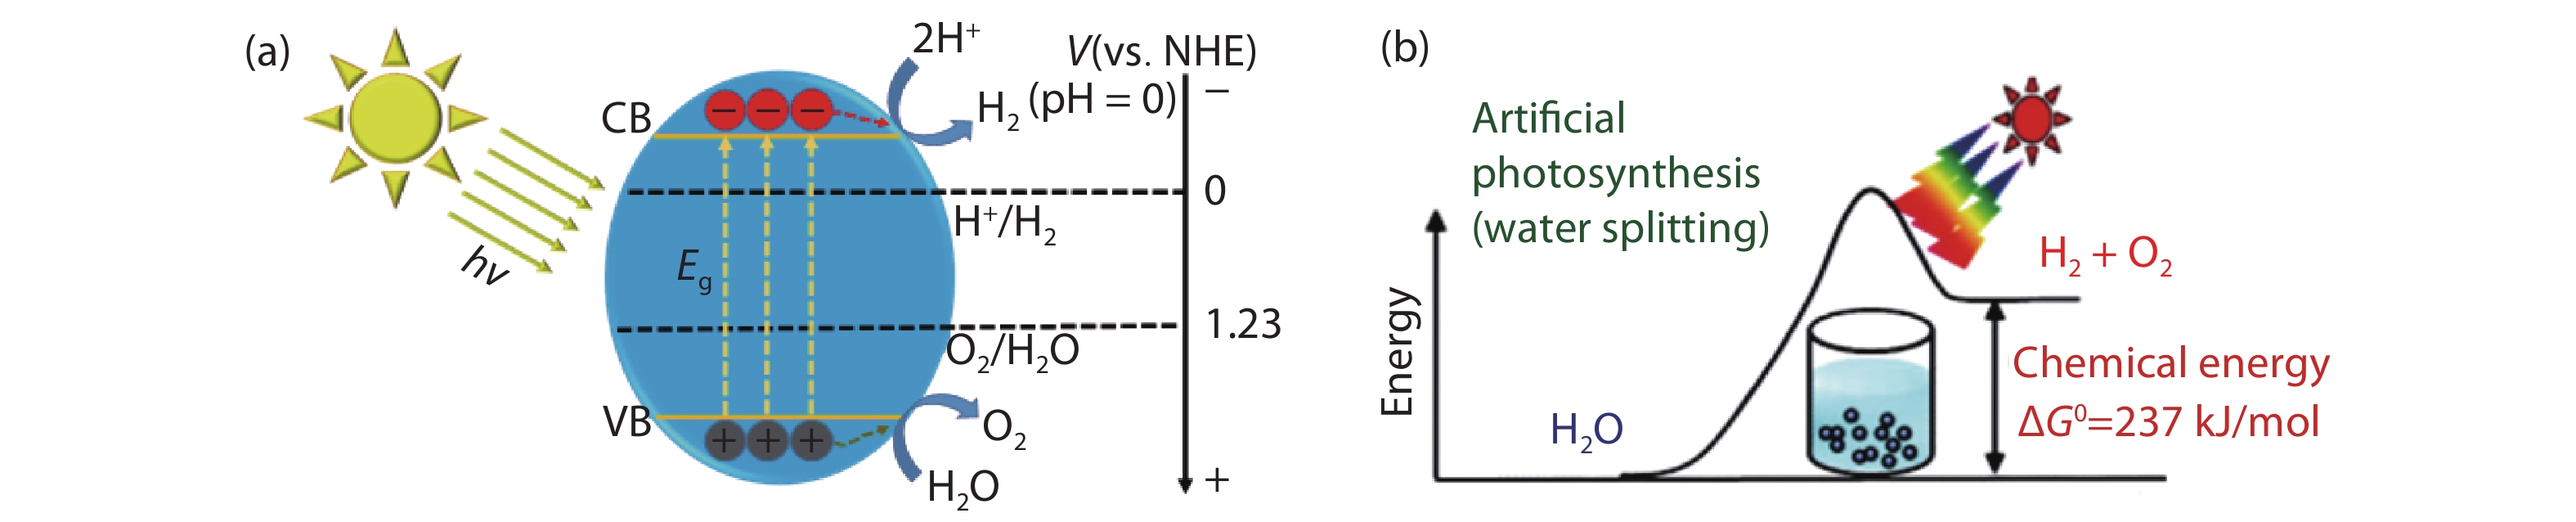 (Color online) Schematic illustration of the basic reaction mechanism of the overall water splitting on a semiconductor (a), and uphill reaction process of photocatalytic water splitting (b). Reprinted from Ref. [44].